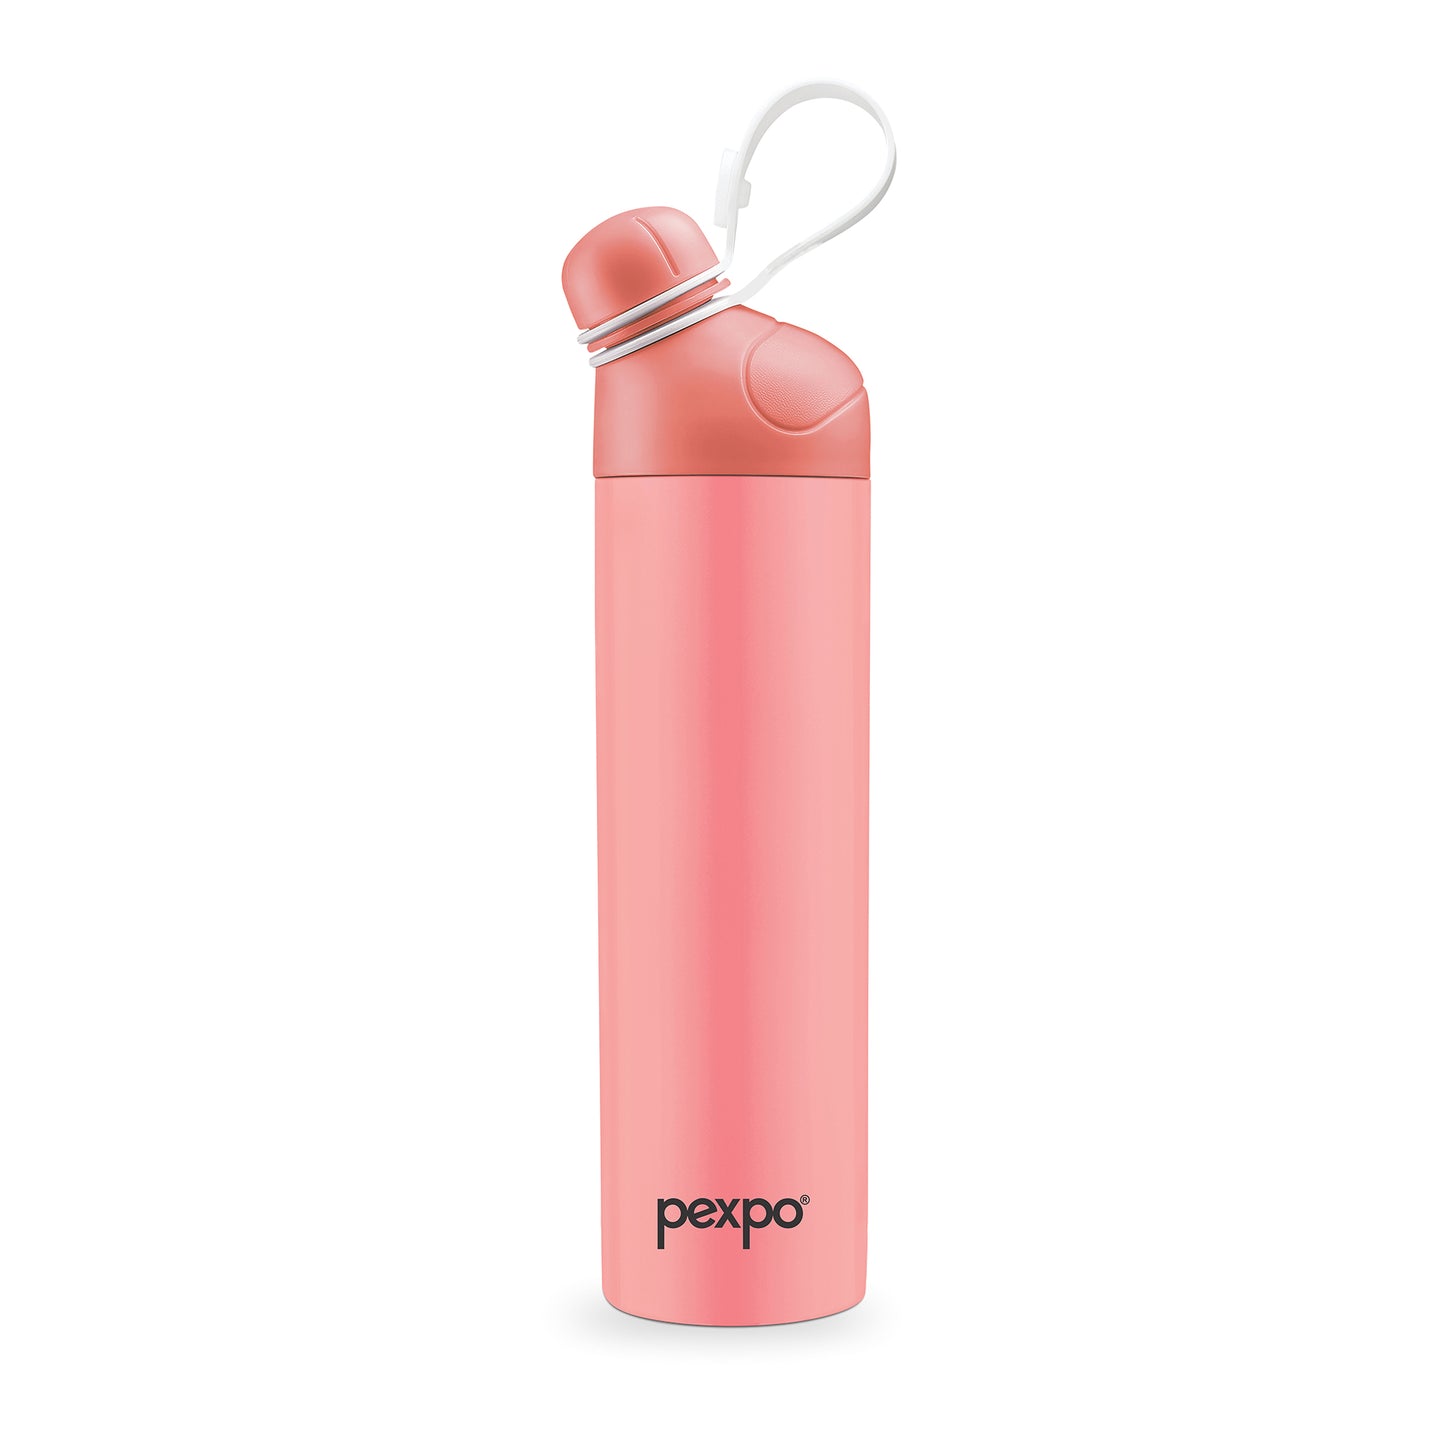 Pexpo PEARL  - Stainless Steel Vacuum Insulated Bottle | 24/7 Hot & Cold With its cool color & design| eco-friendly|